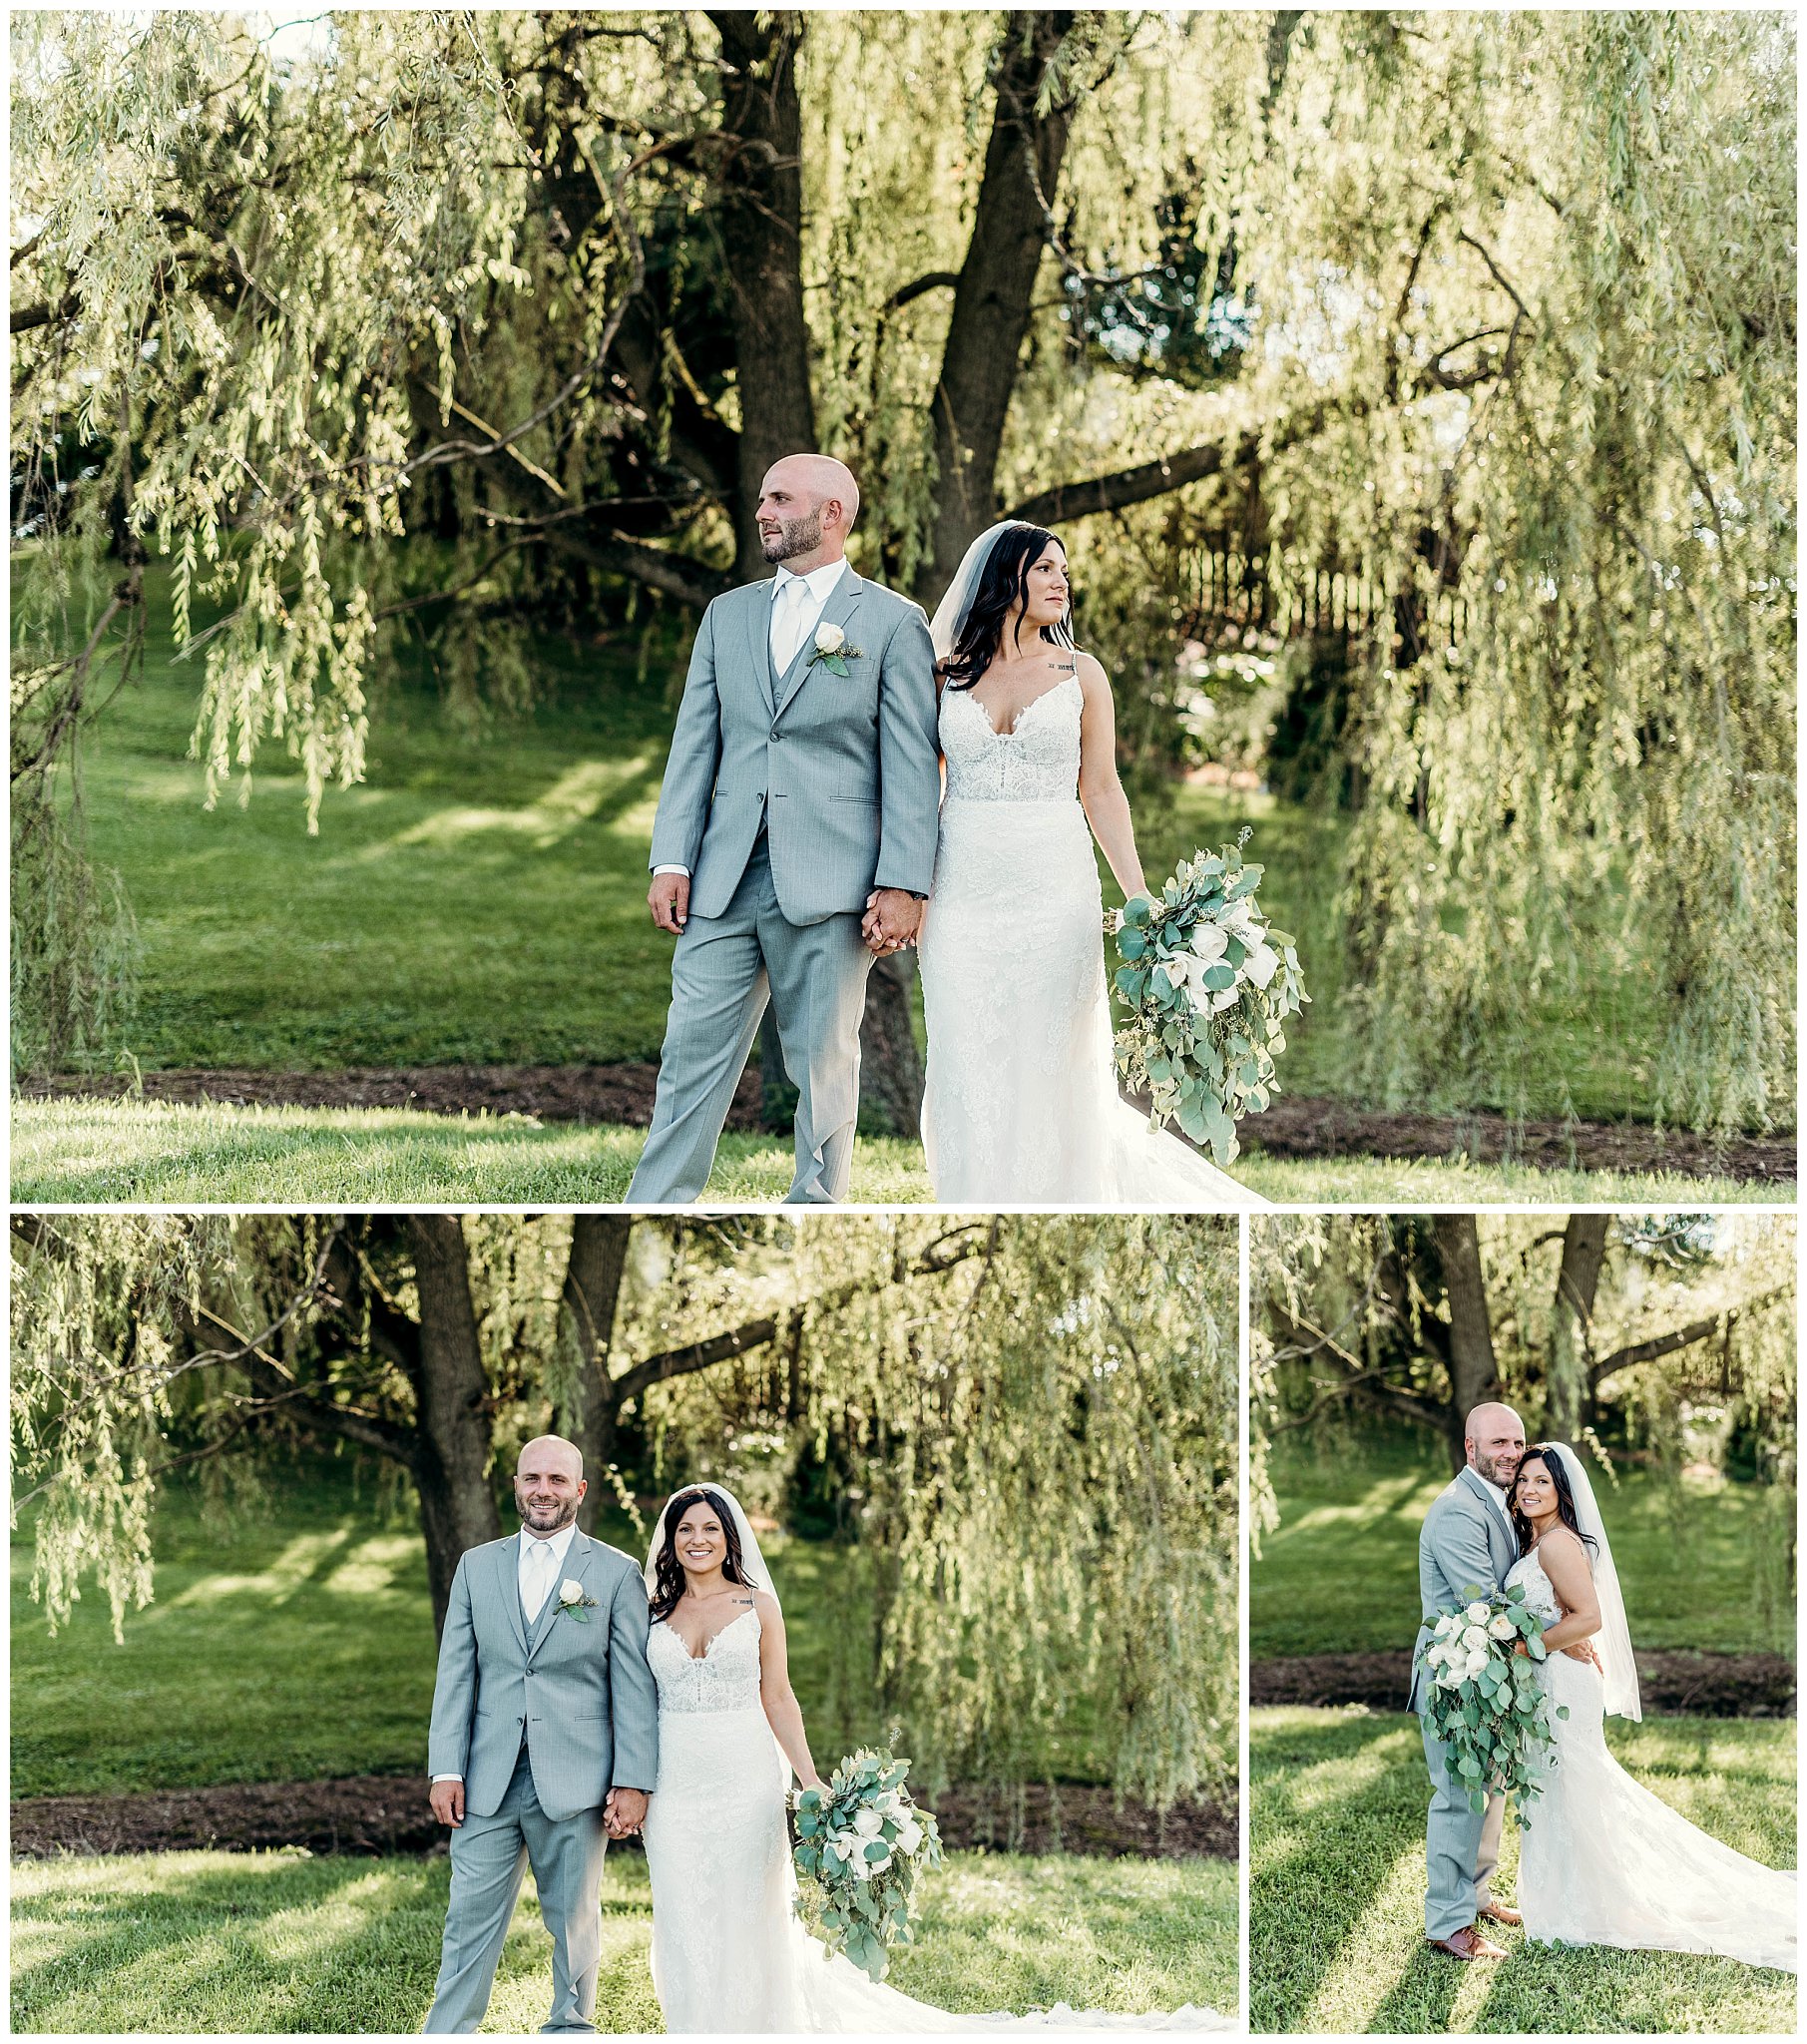 Bride and Groom by the willow tree at Rustic Acres